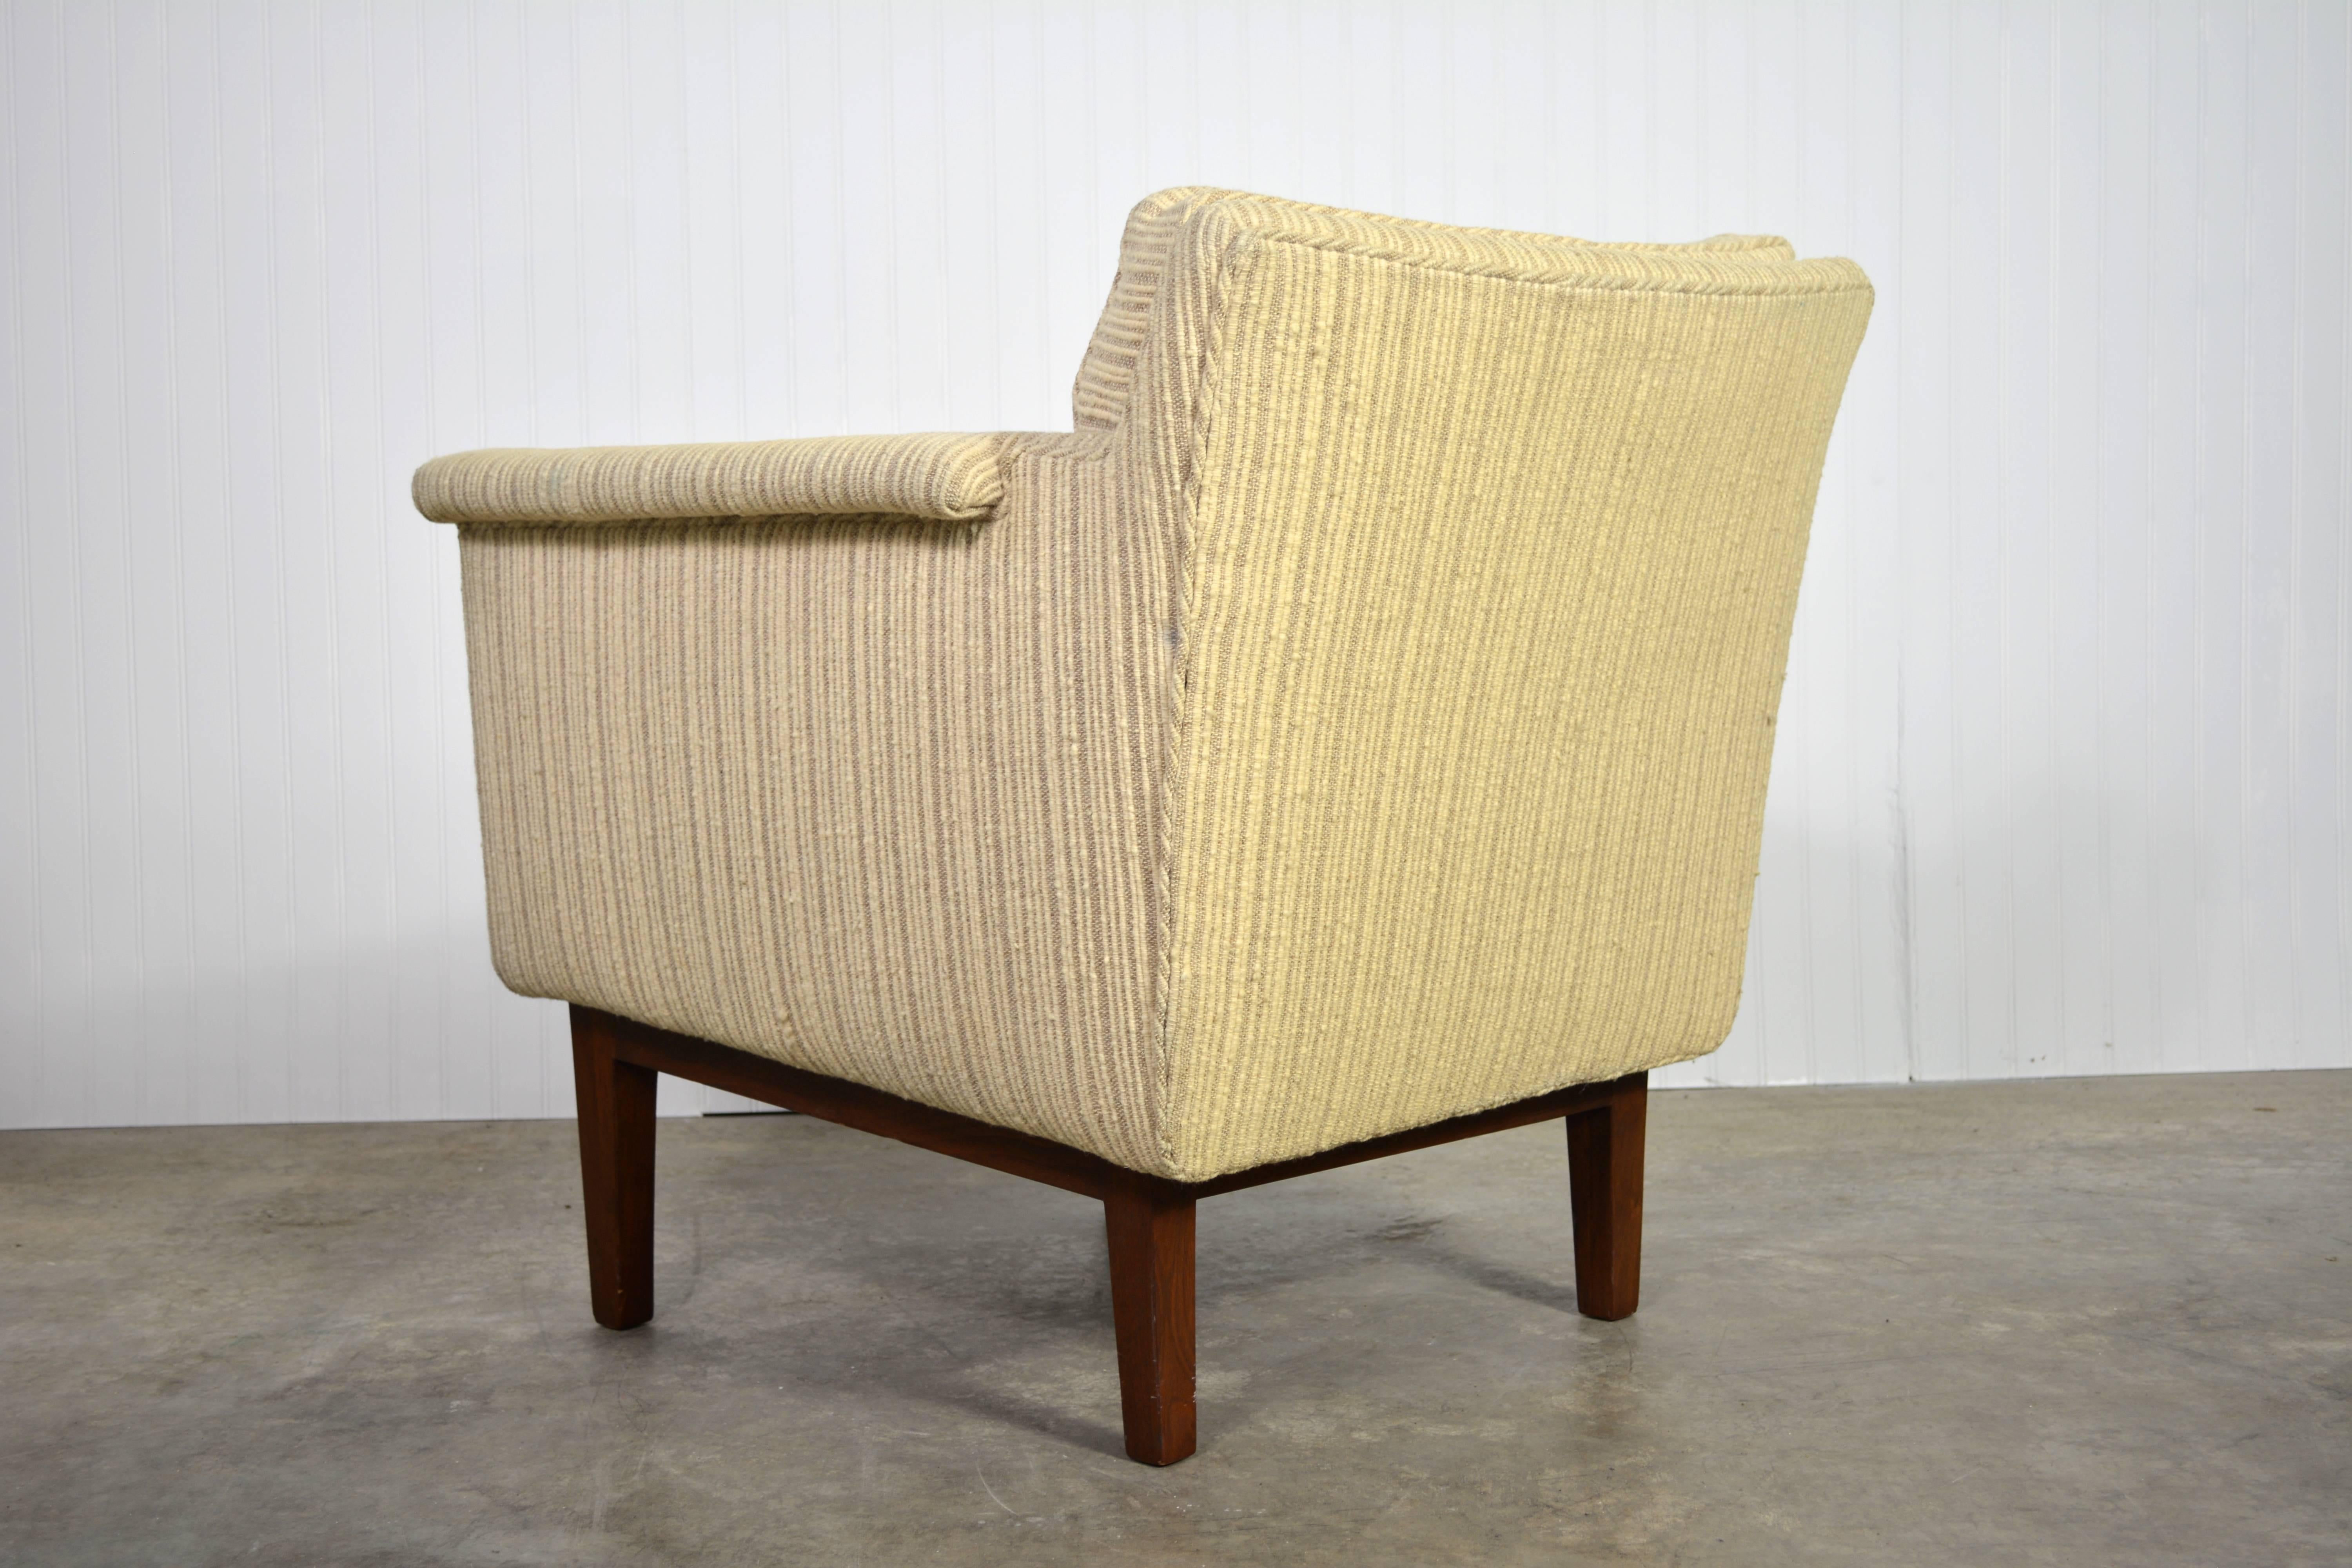 Edward Wormley Lounge Chair for Dunbar In Good Condition For Sale In Loves Park, IL